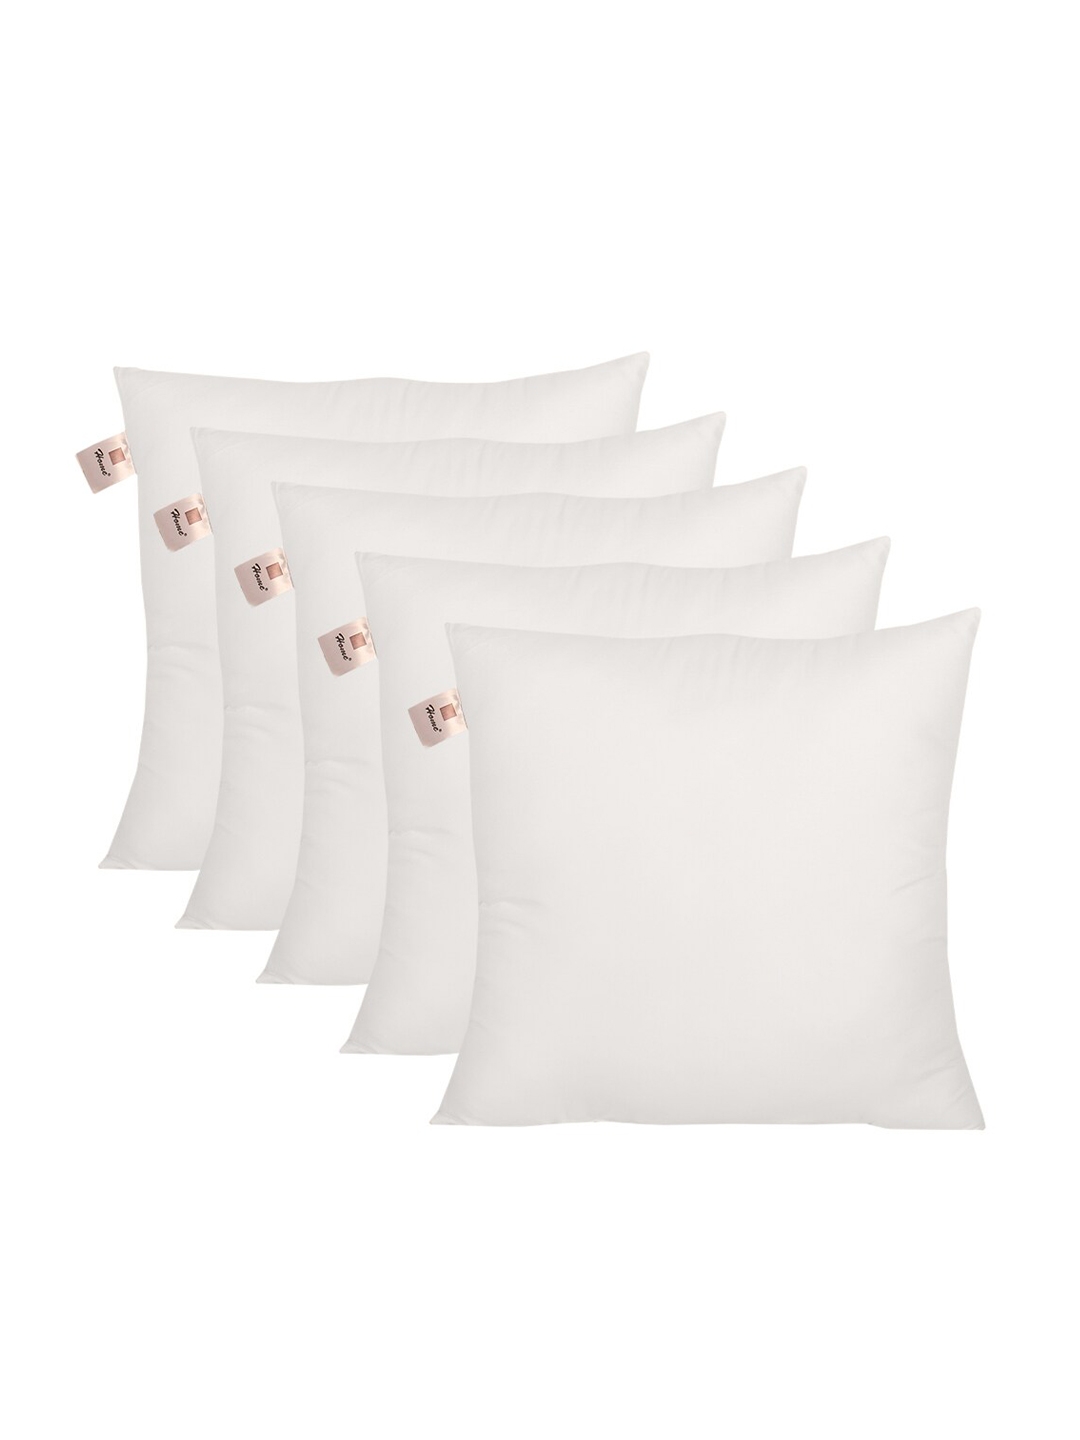 Home Set Of 5 White Solid Microfibre Cushion Inserts